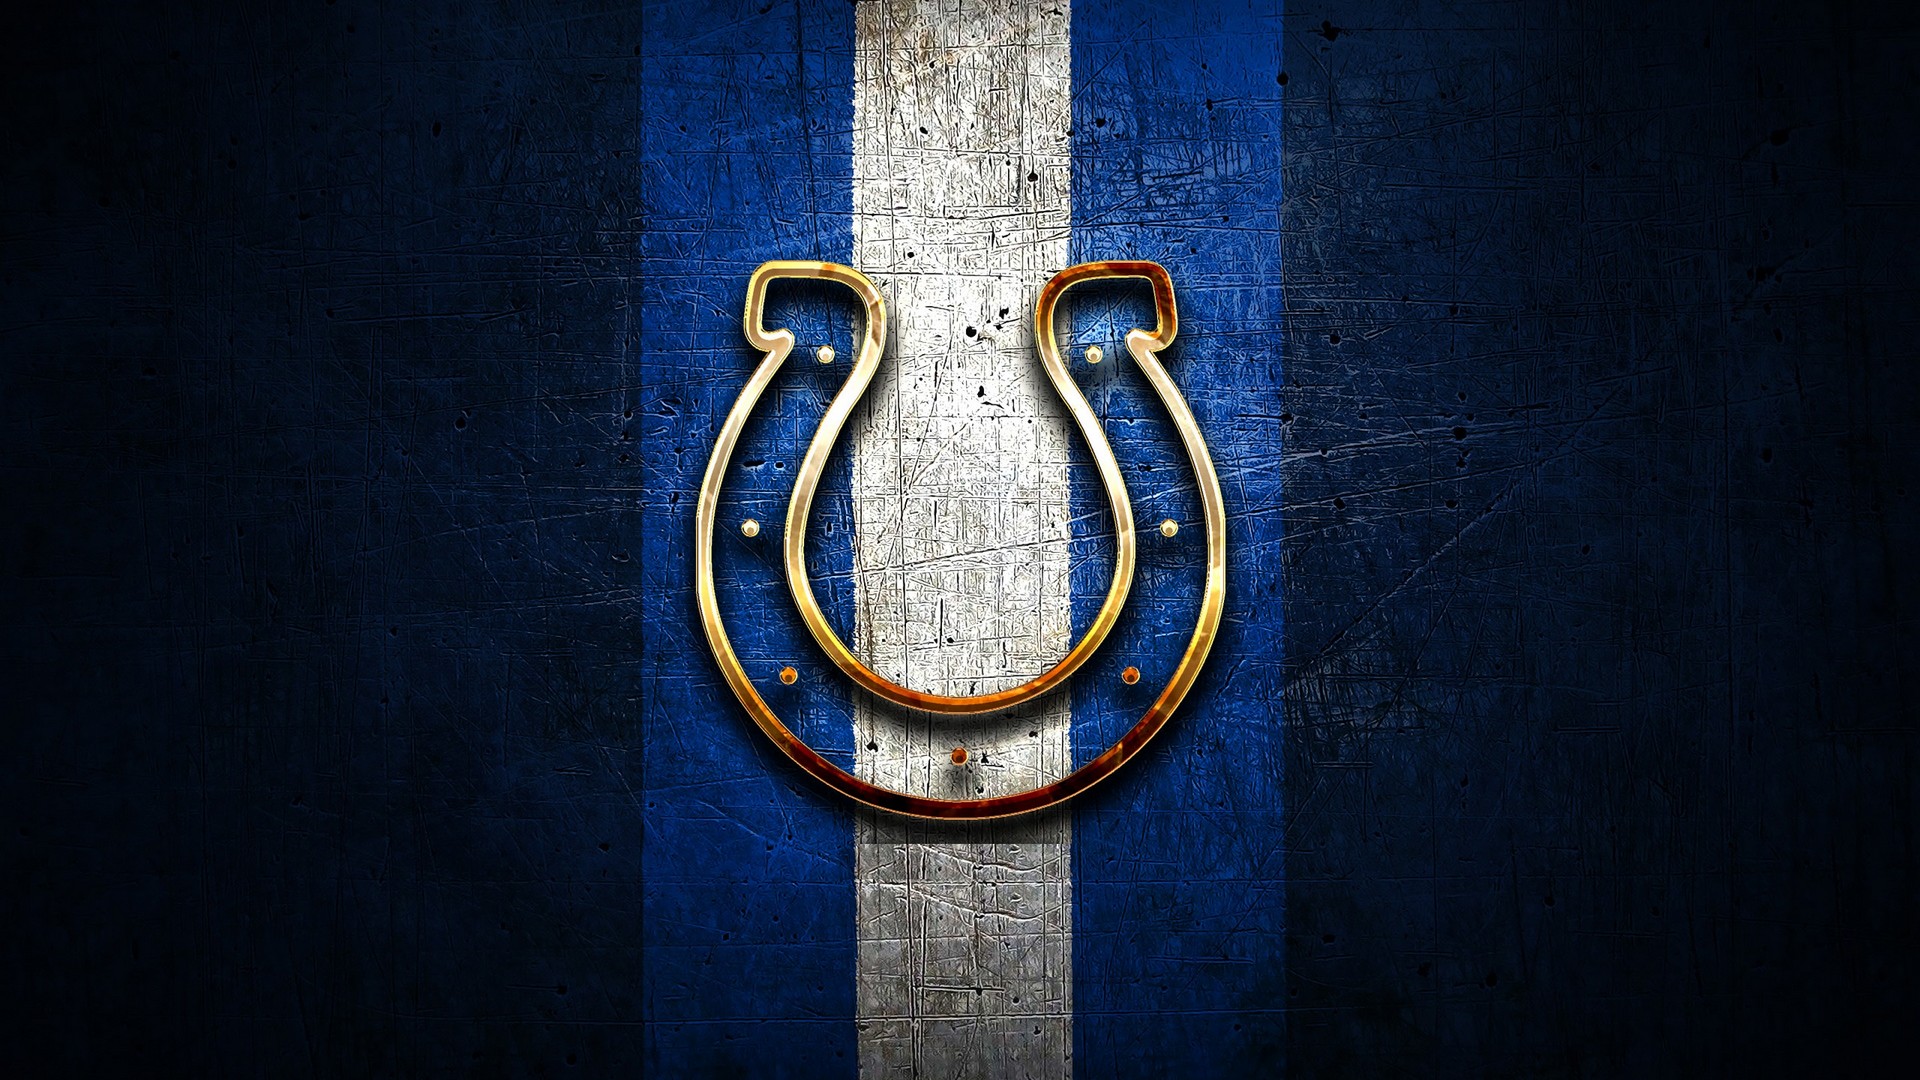 Indianapolis Colts Mac Wallpaper With high-resolution 1920X1080 pixel. Download and set as wallpaper for Desktop Computer, Apple iPhone X, XS Max, XR, 8, 7, 6, SE, iPad, Android